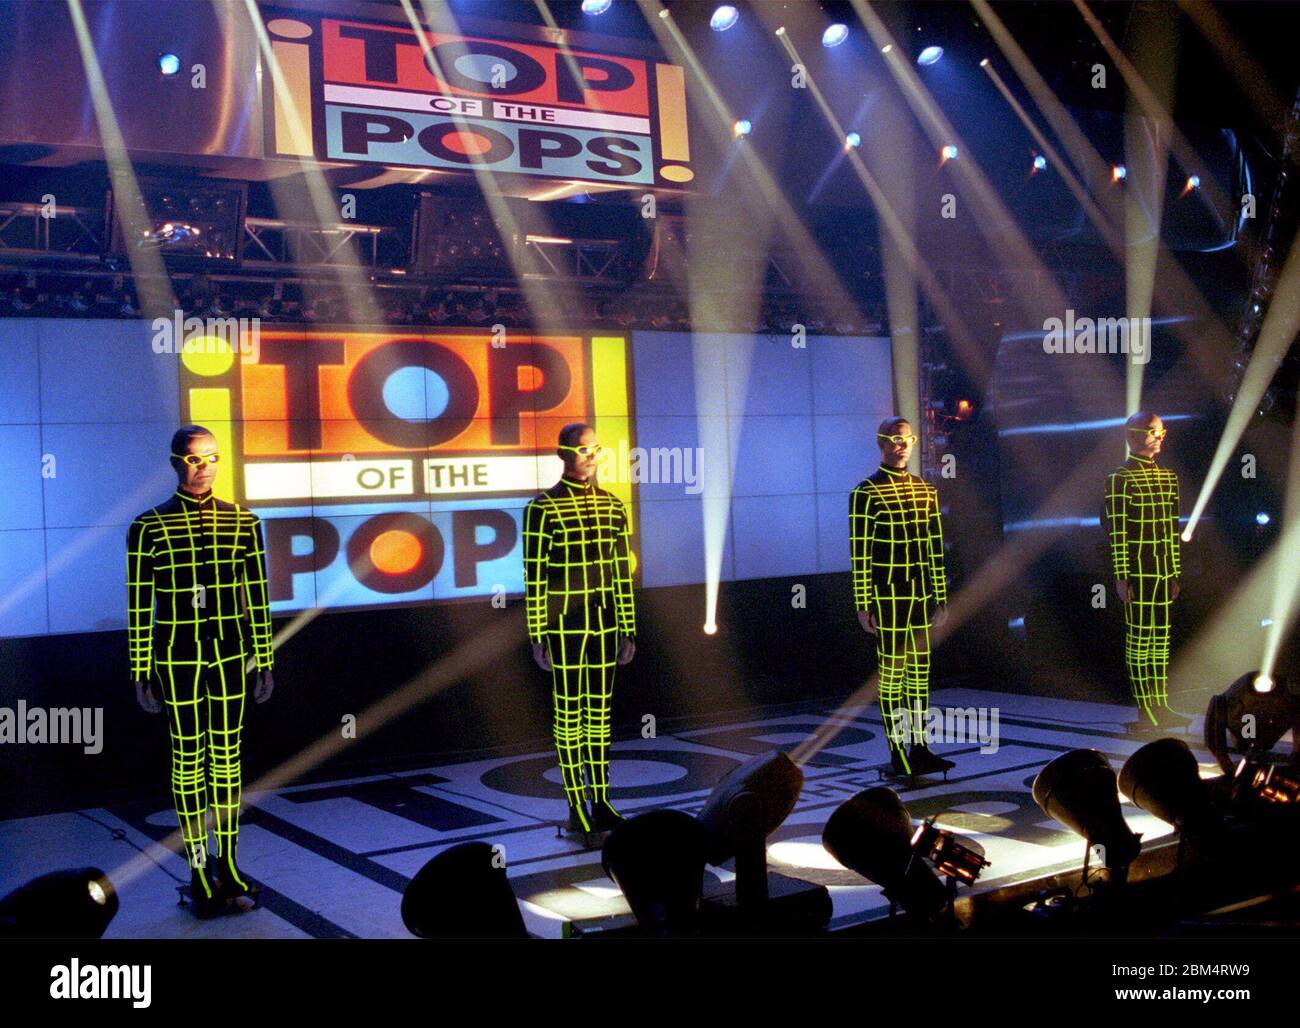 The legendary band 'Kraftwerk' appears on January 13th, 2000 in Hamburg during the recording of the RTL music show 'Top of the Pops', which will be broadcast on January 15th at 5.45pm. After years of total TV abstinence, the quartet dawith is working on a music show with for the first time. Techno's forefather's latest single, 'Expo 2000', ranks 49th this week on the charts. Most recently, Kraftwerk appeared on the program 'Mensch Meier' in 1991. In 1971 she made her last appearance on a music program in the 'Beat Club'. ATTENTION: Reprint only with photo credit: Peter Boettcher/EMI! | usage Stock Photo